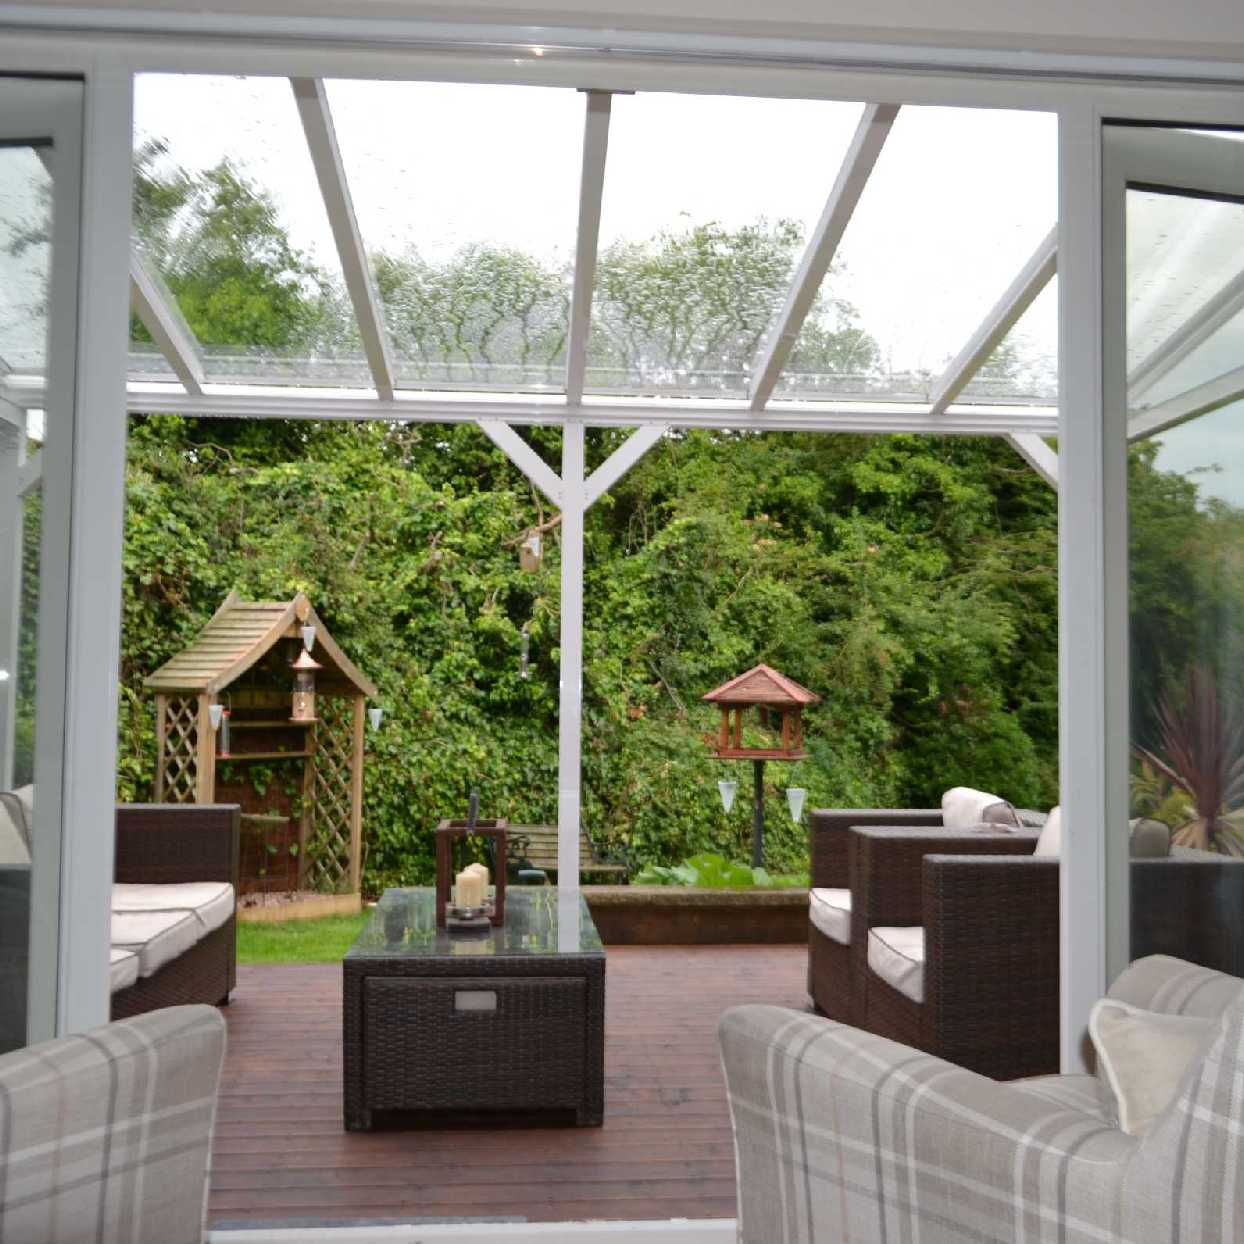 Buy Omega Smart Free-Standing, White MonoPitch Roof Canopy with 6mm Glass Clear Plate Polycarbonate Glazing - 7.0m (W) x 2.5m (P), (8) Supporting Posts online today